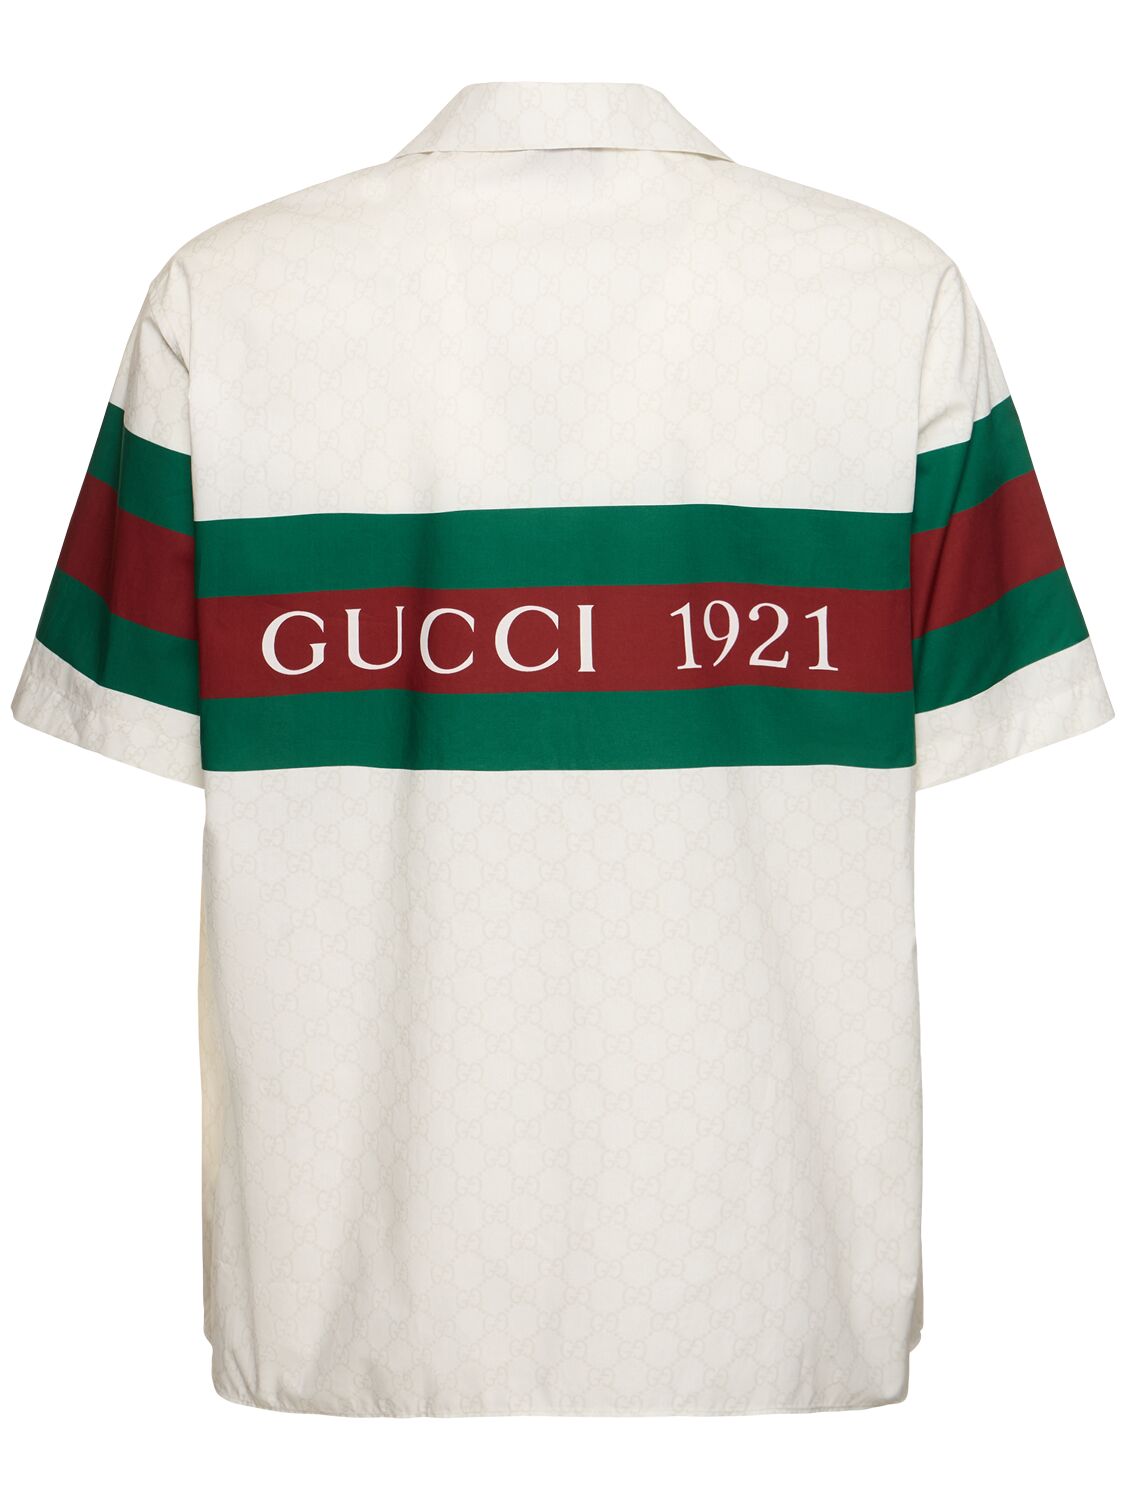 Shop Gucci 1921 Web Cotton Shirt In White,green,red